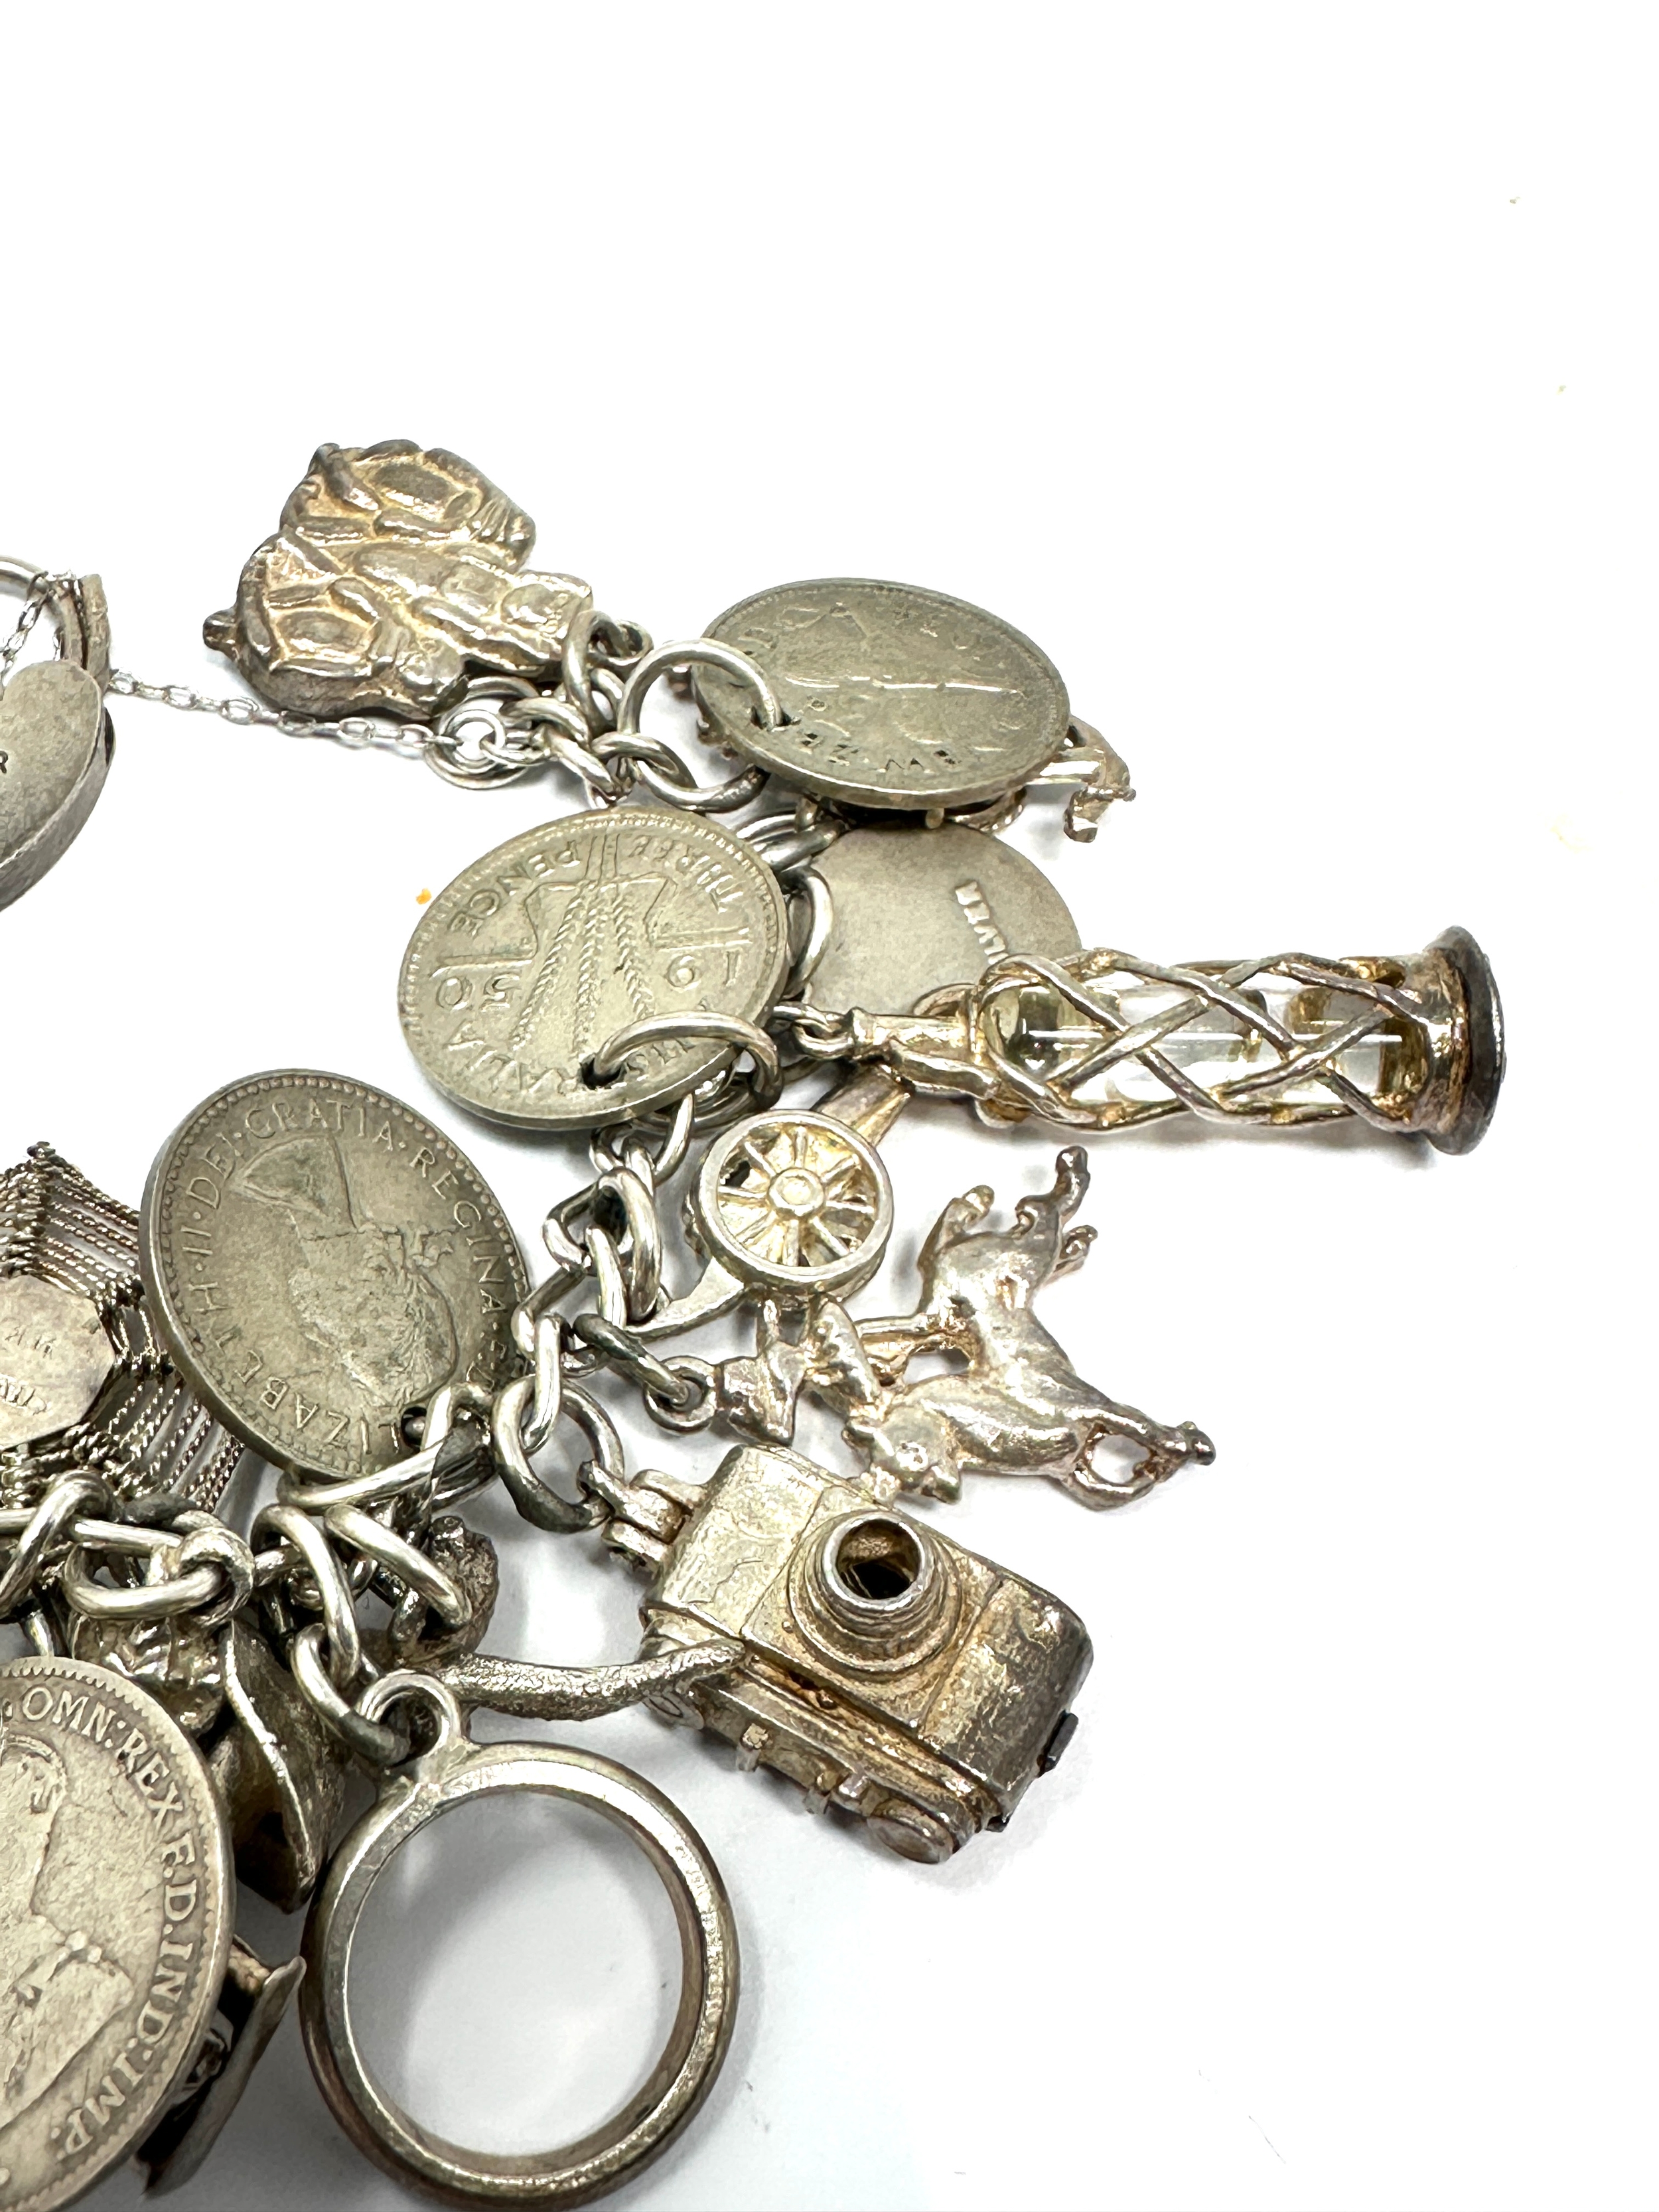 Vintage silver charm bracelet and charms weight 78g - Image 3 of 4